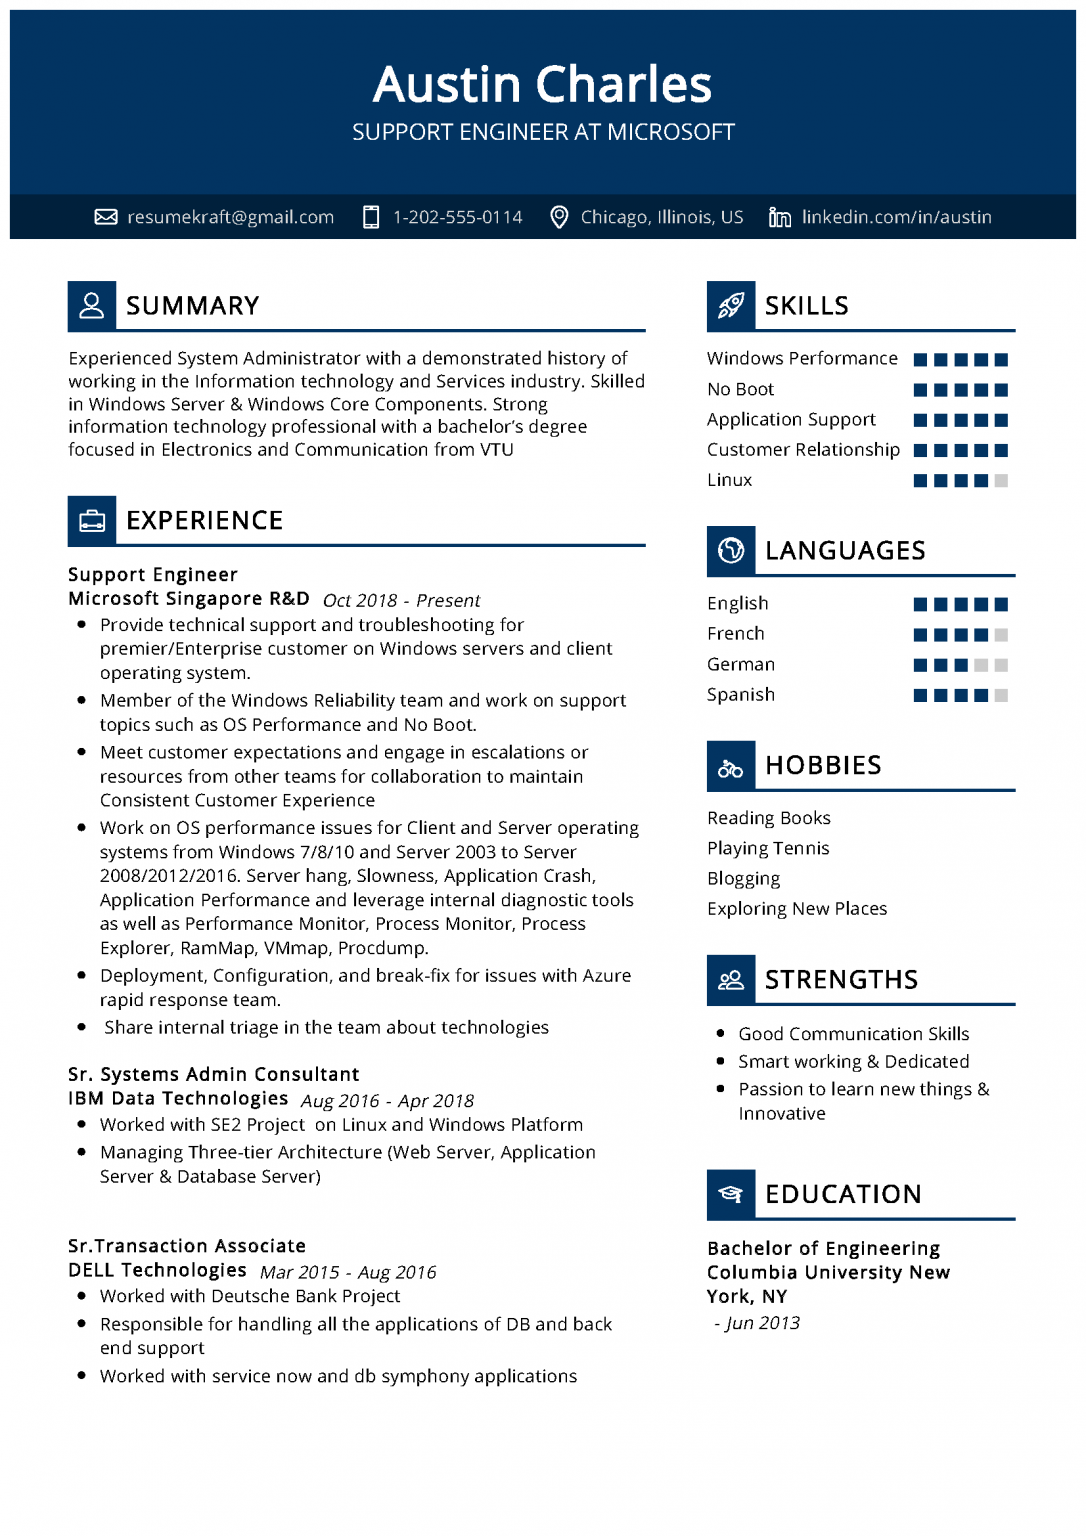 researching skills on resume